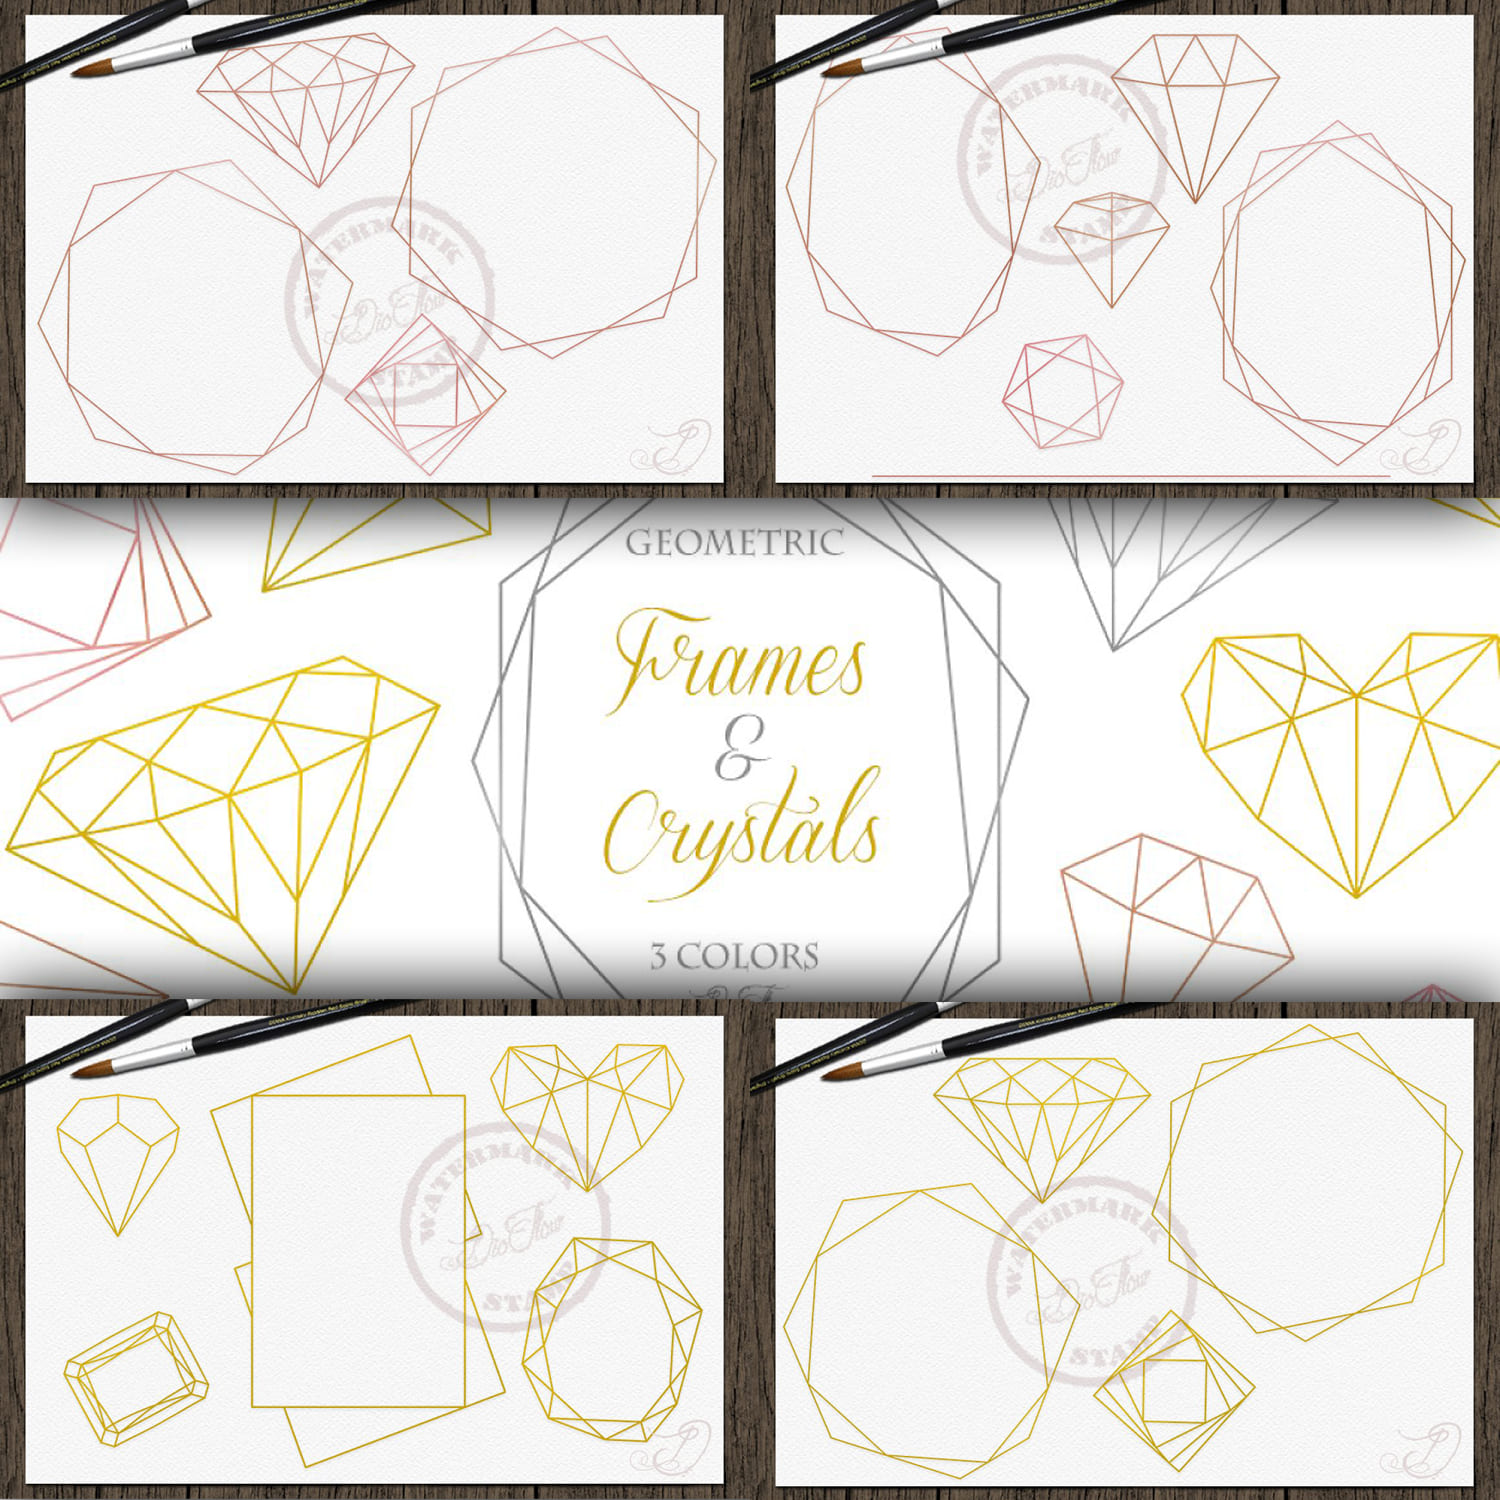 Geometric Frames And Crystals cover.